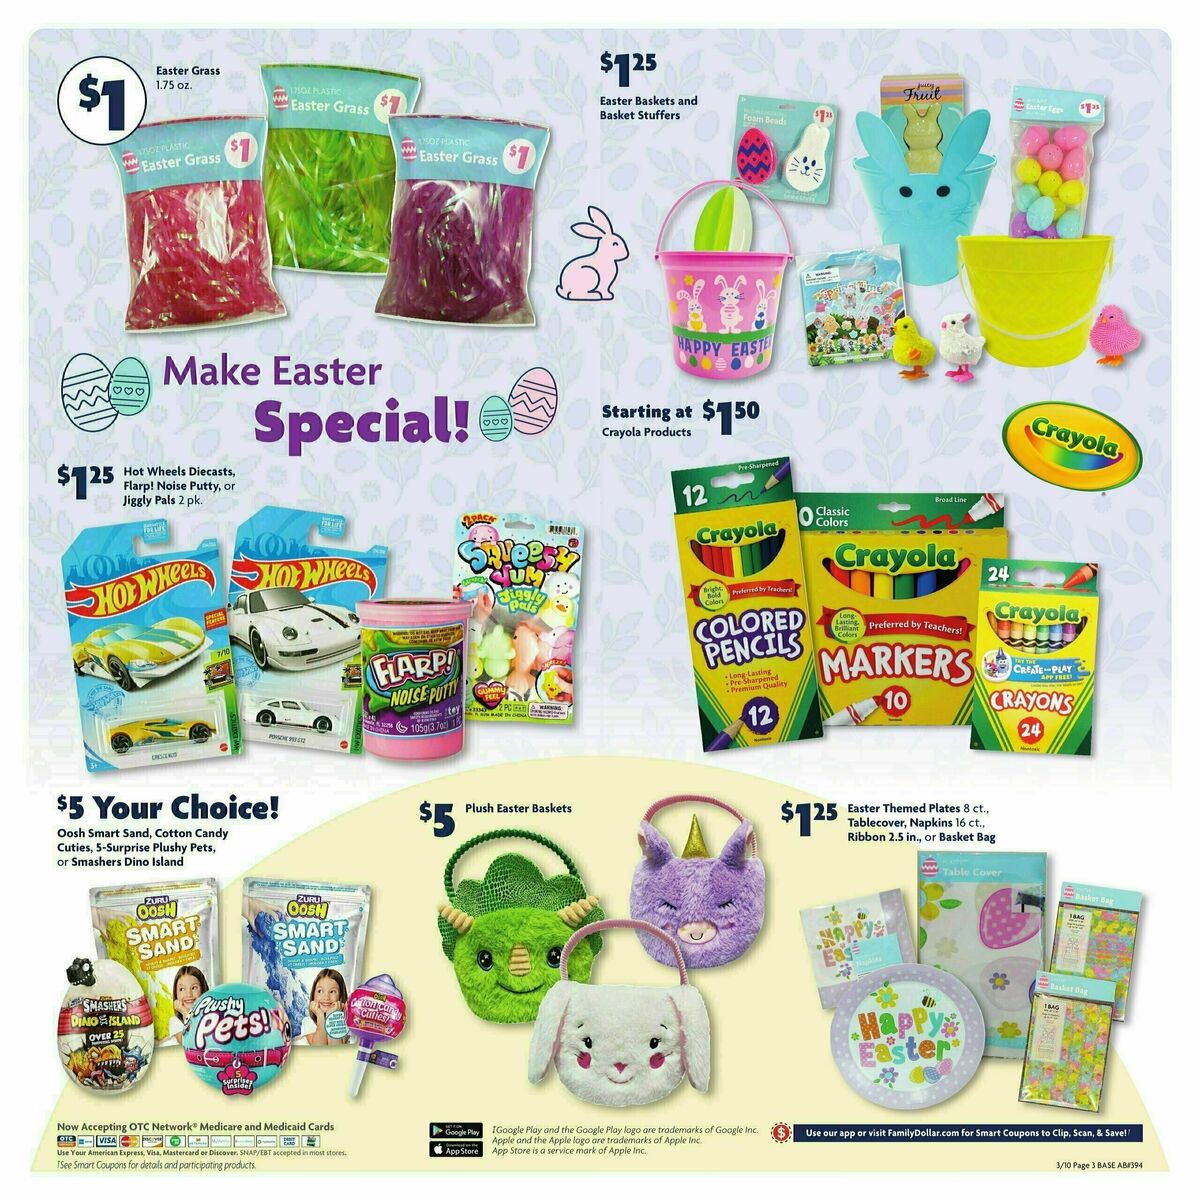 Family Dollar Weekly Ad from March 10